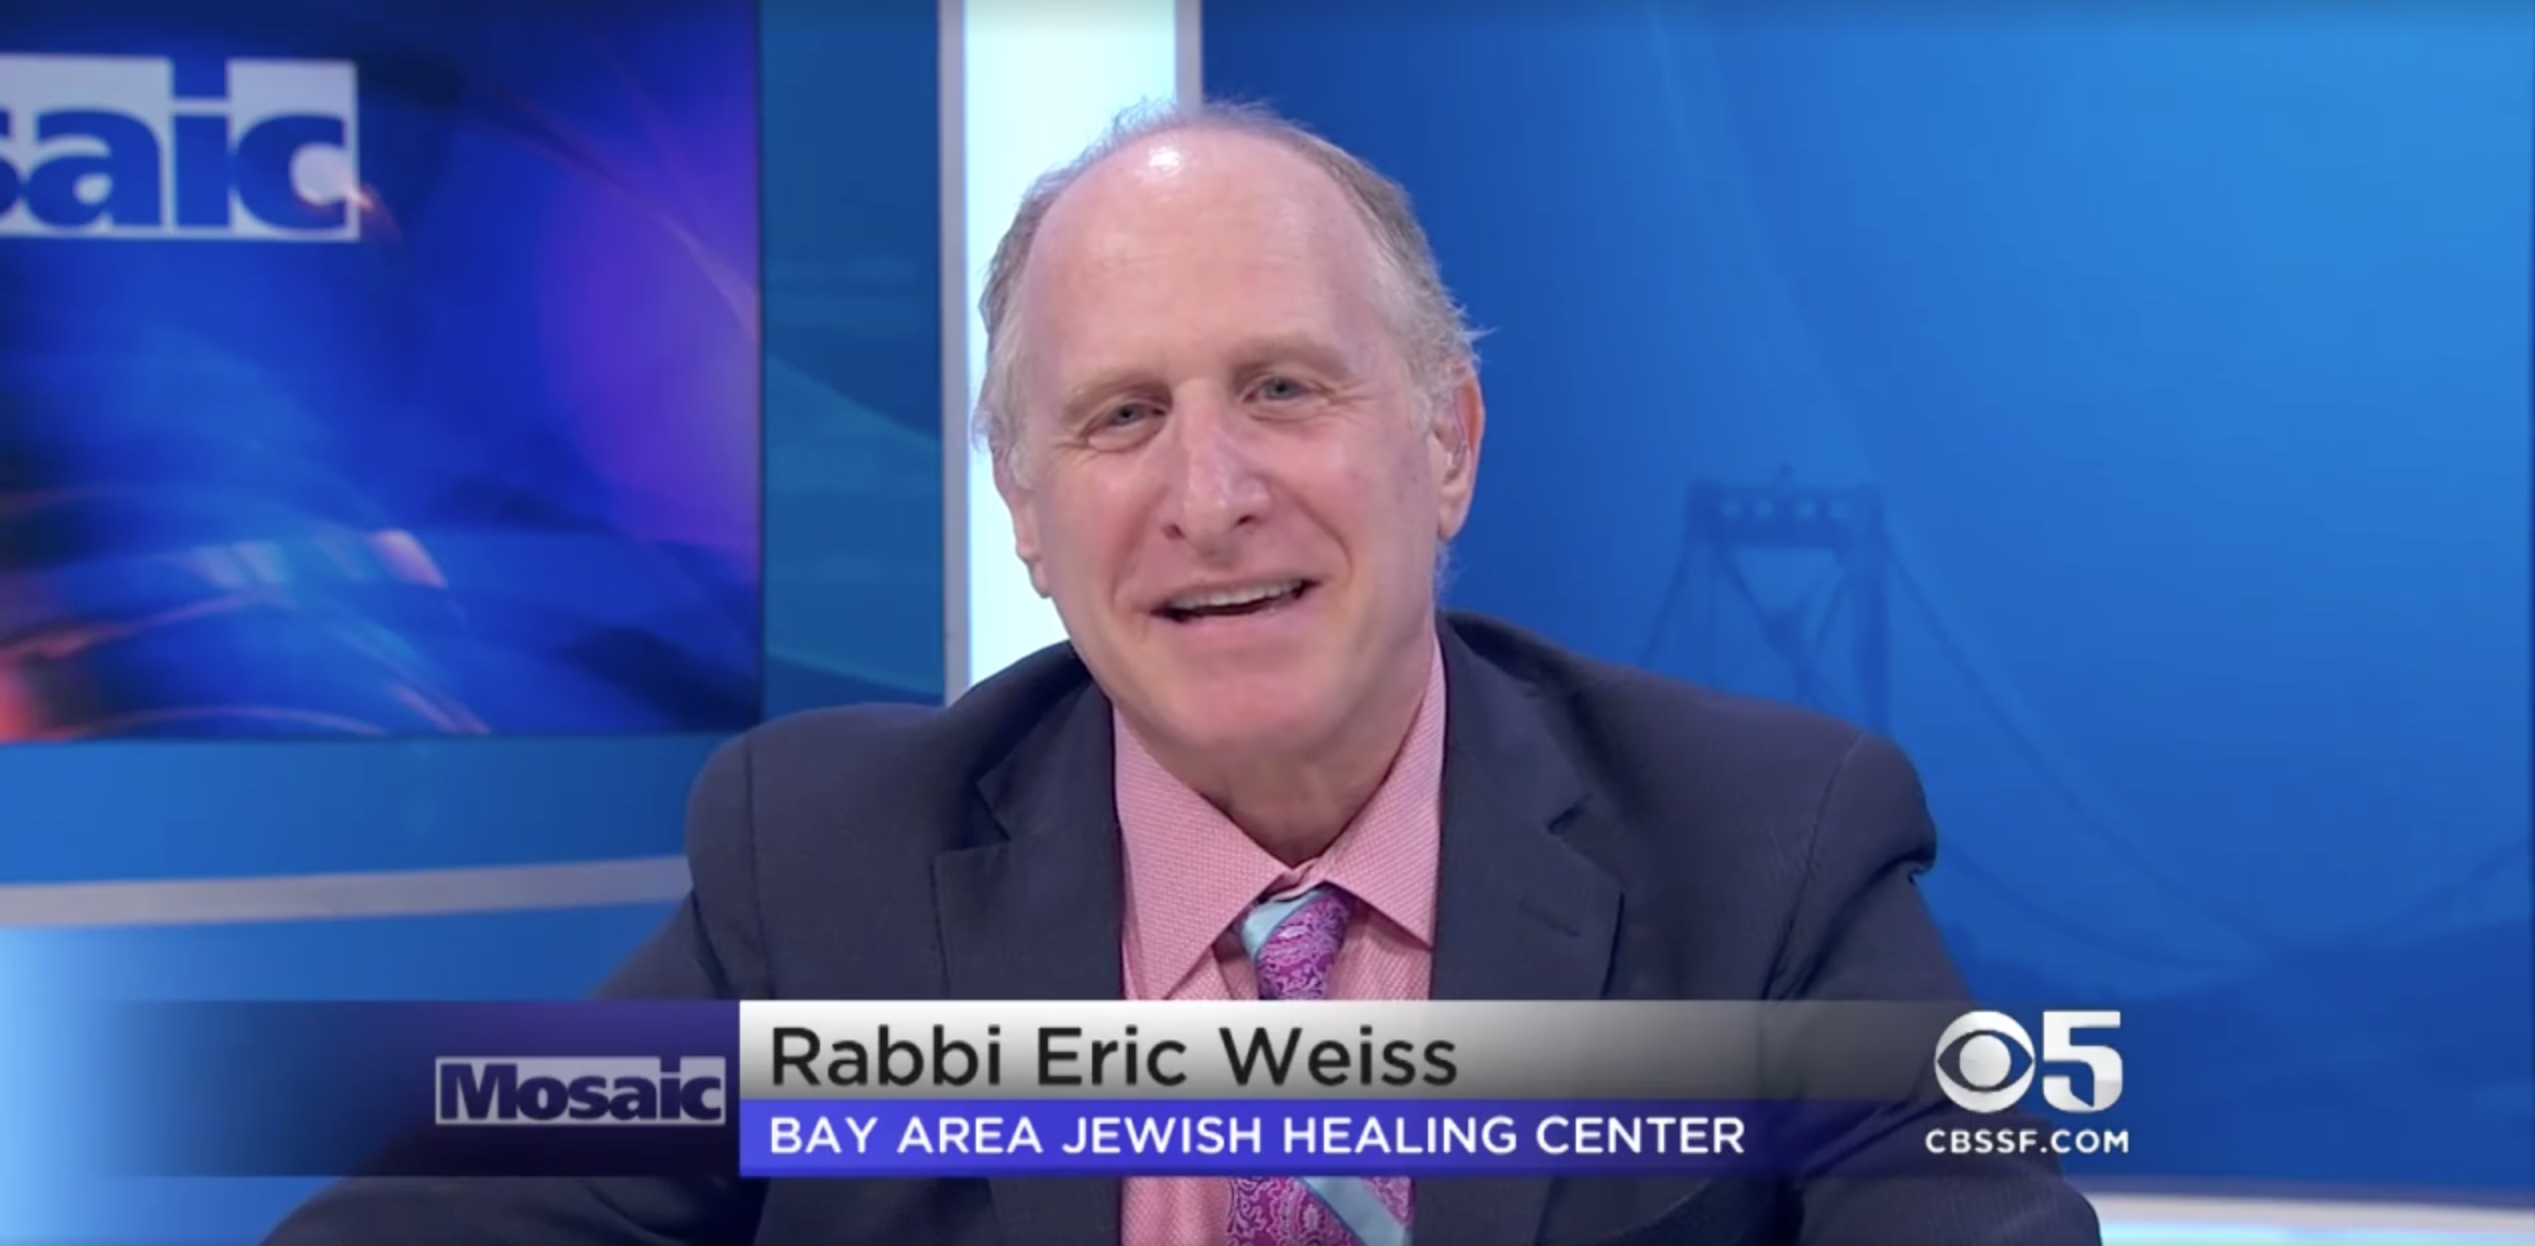 Rabbi Eric Weiss is one of the hosts of KPIX TV's "Mosaic."